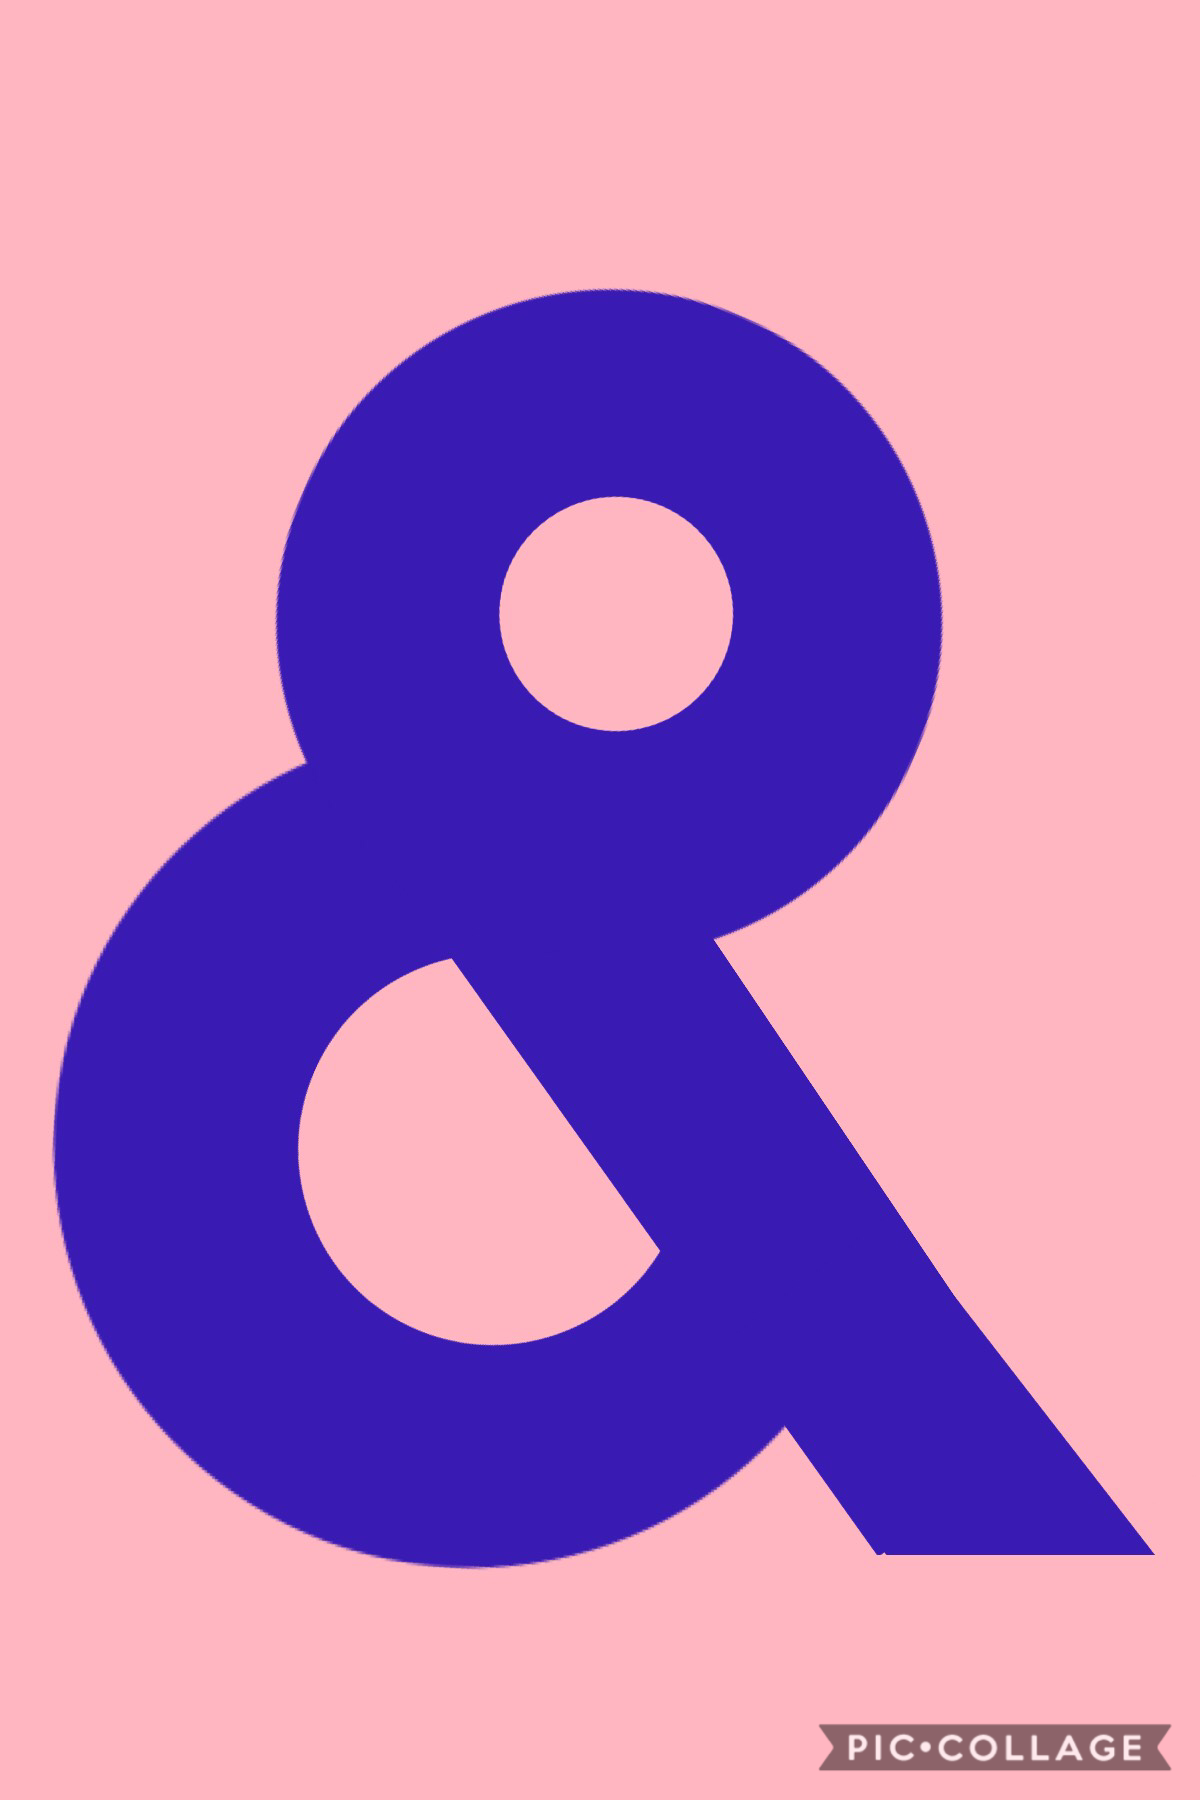 Font 4: Young; Ampersand &
THIS IS IT SORRY 